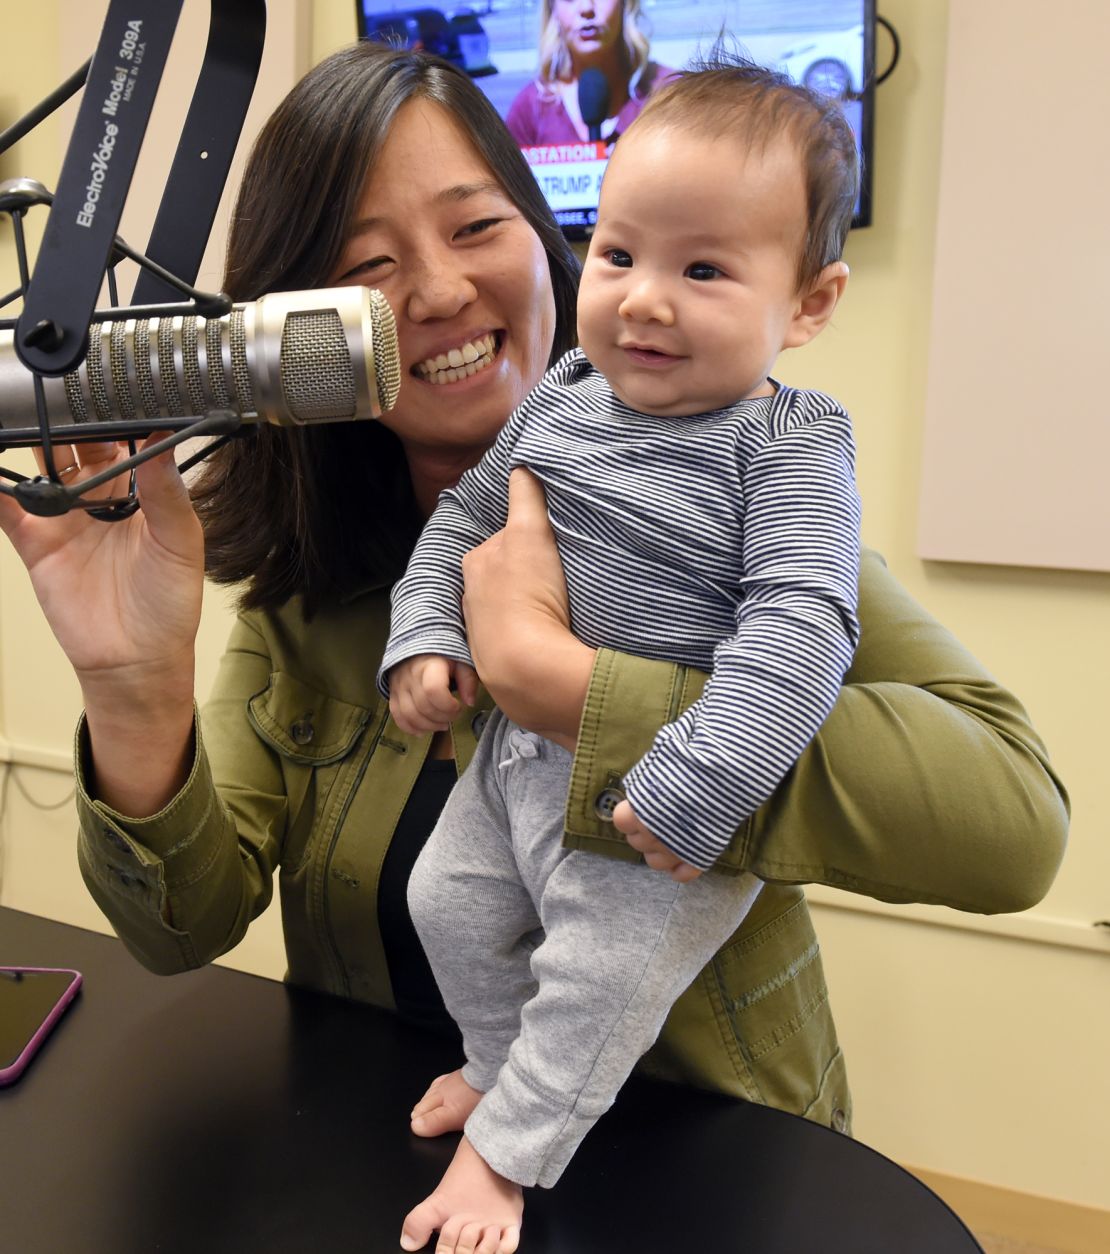 Boston City Councilor Michelle Wu and her baby, 11-week-old Cass, on Herald radio October 3, 2017.